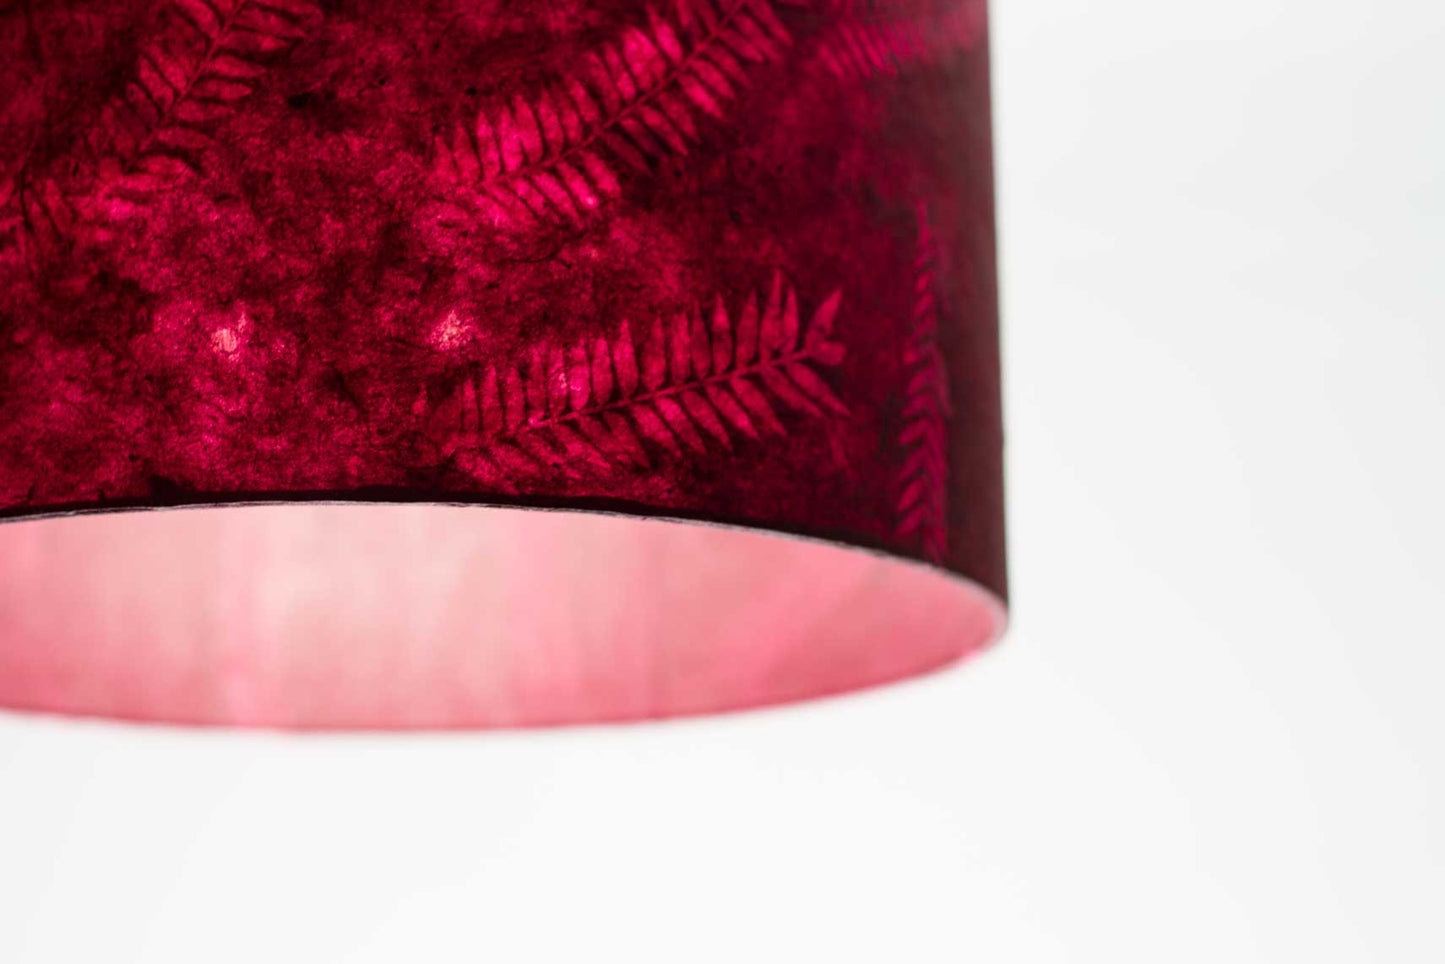 Oval Lamp Shade - P25 - Resistance Dyed Pink Fern, 20cm(w) x 30cm(h) x 13cm(d)